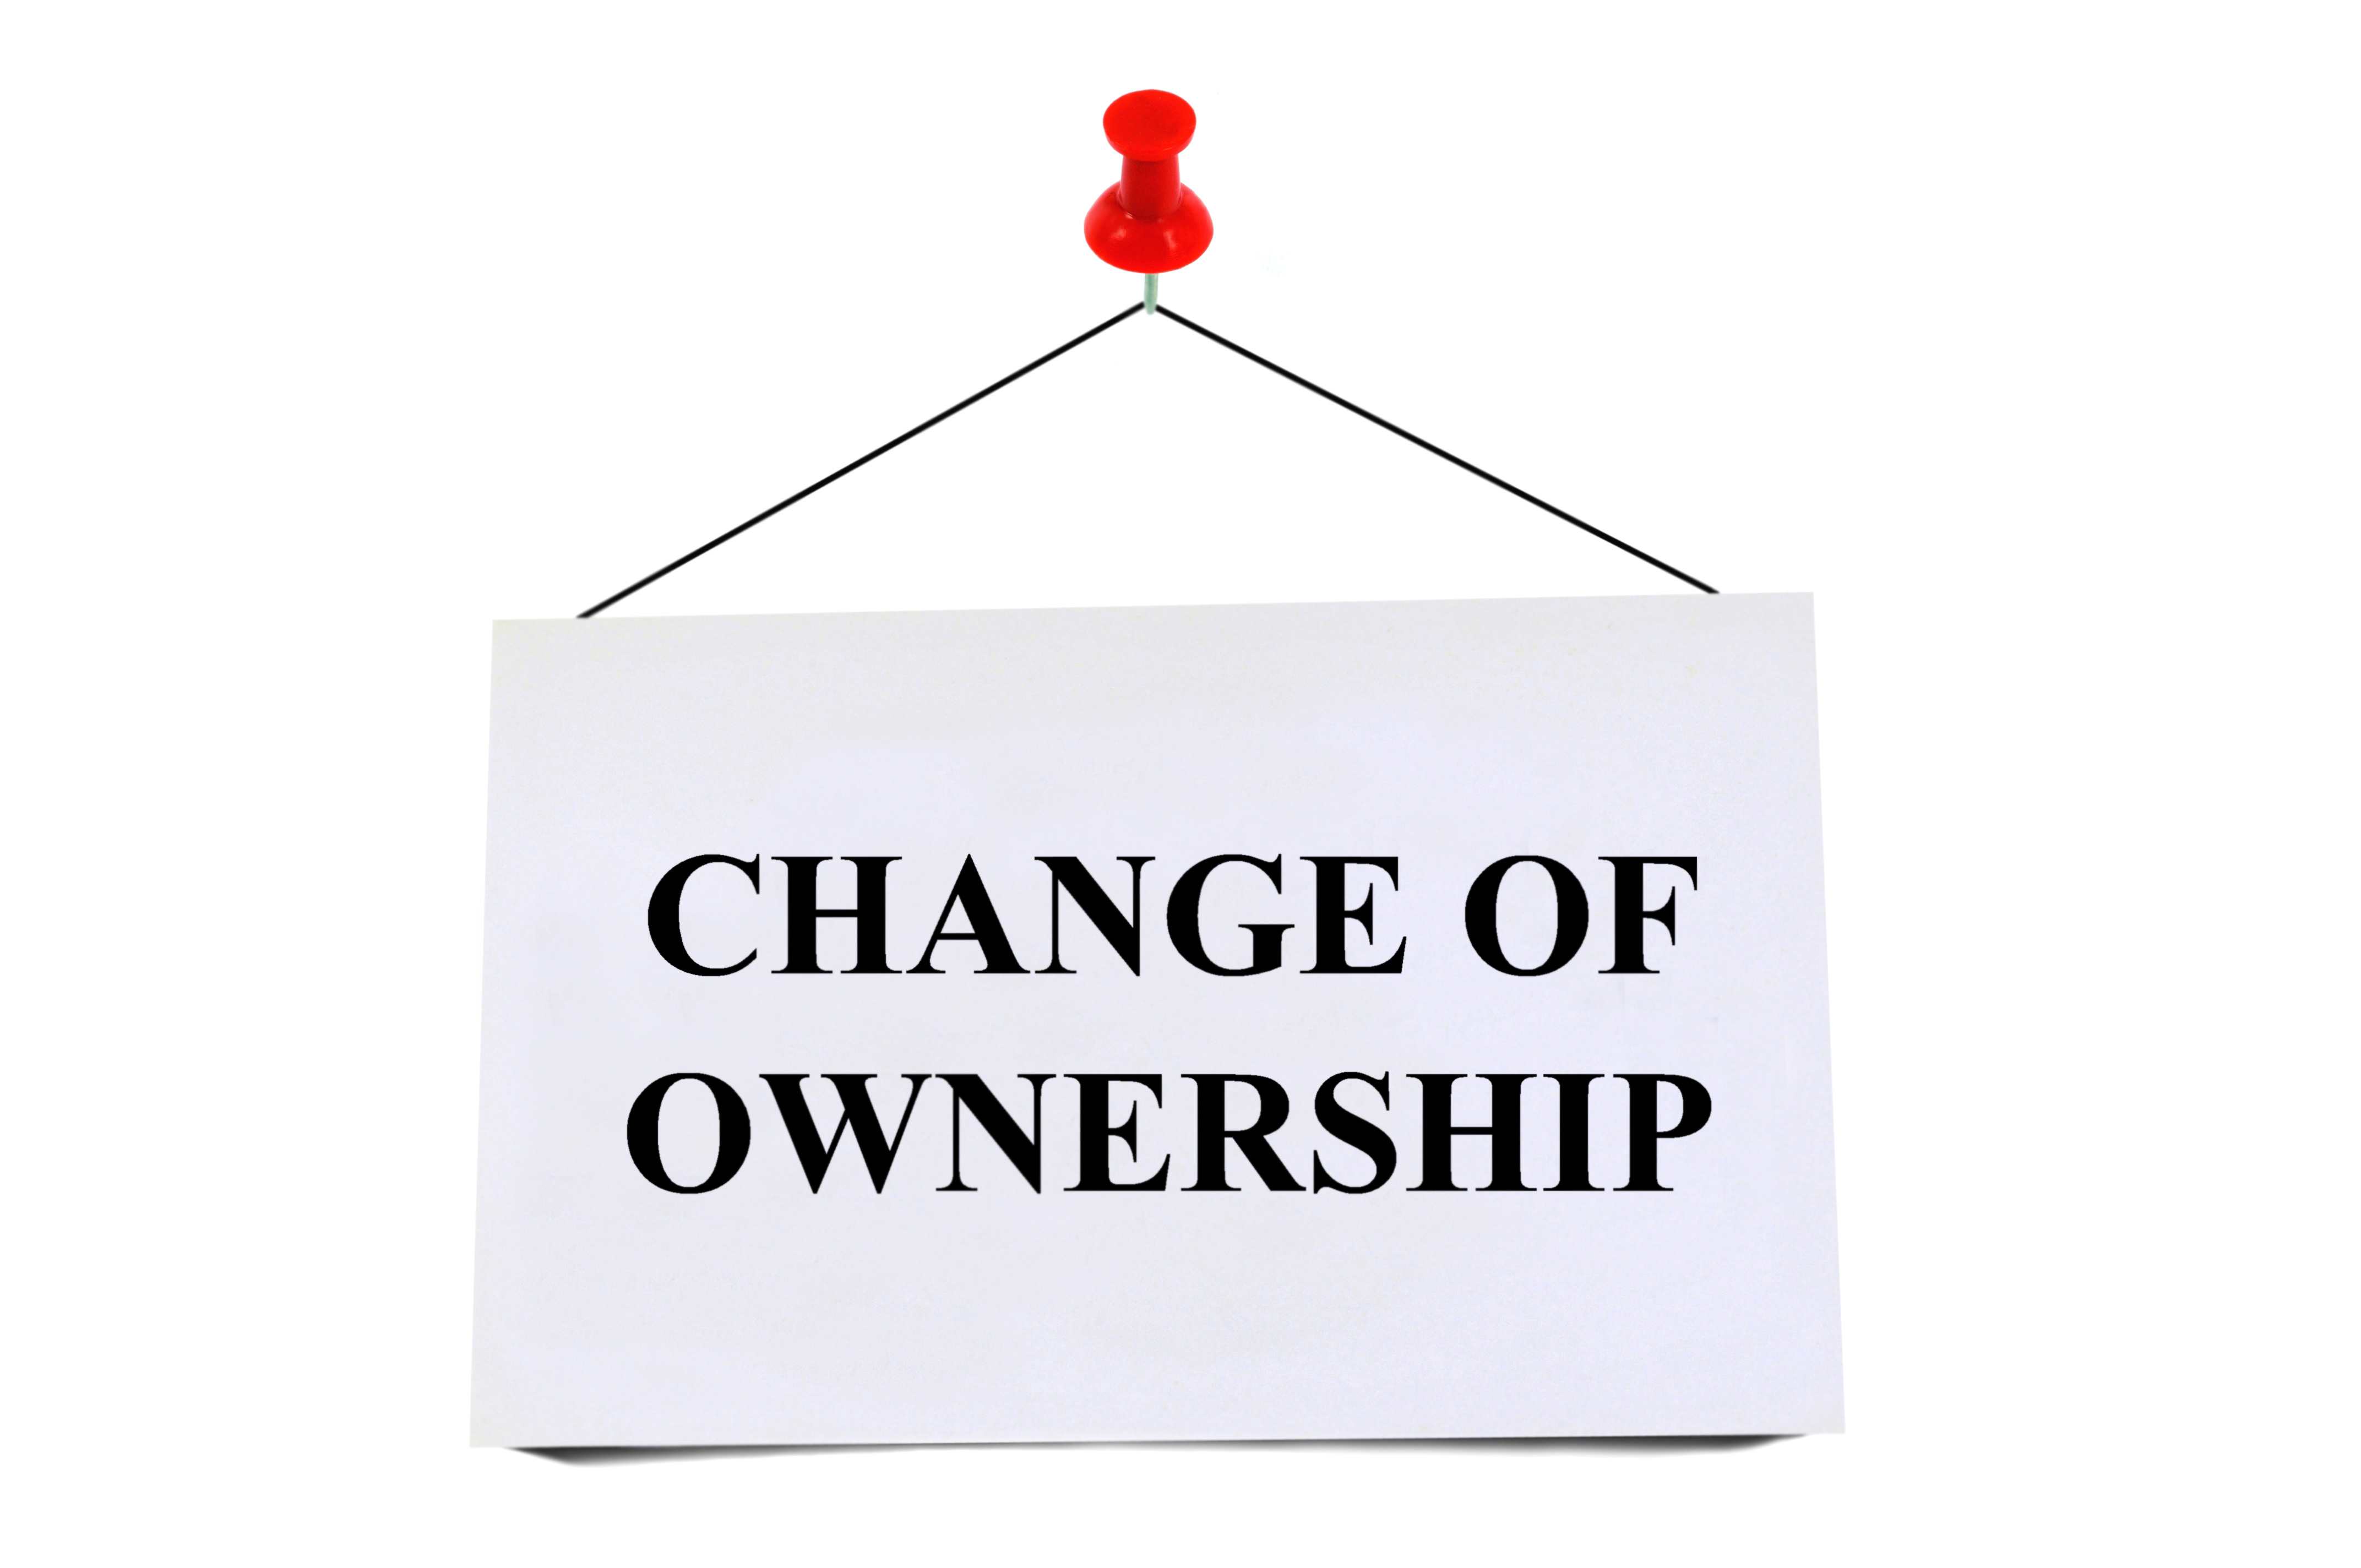 How to change the ownership of my LLC